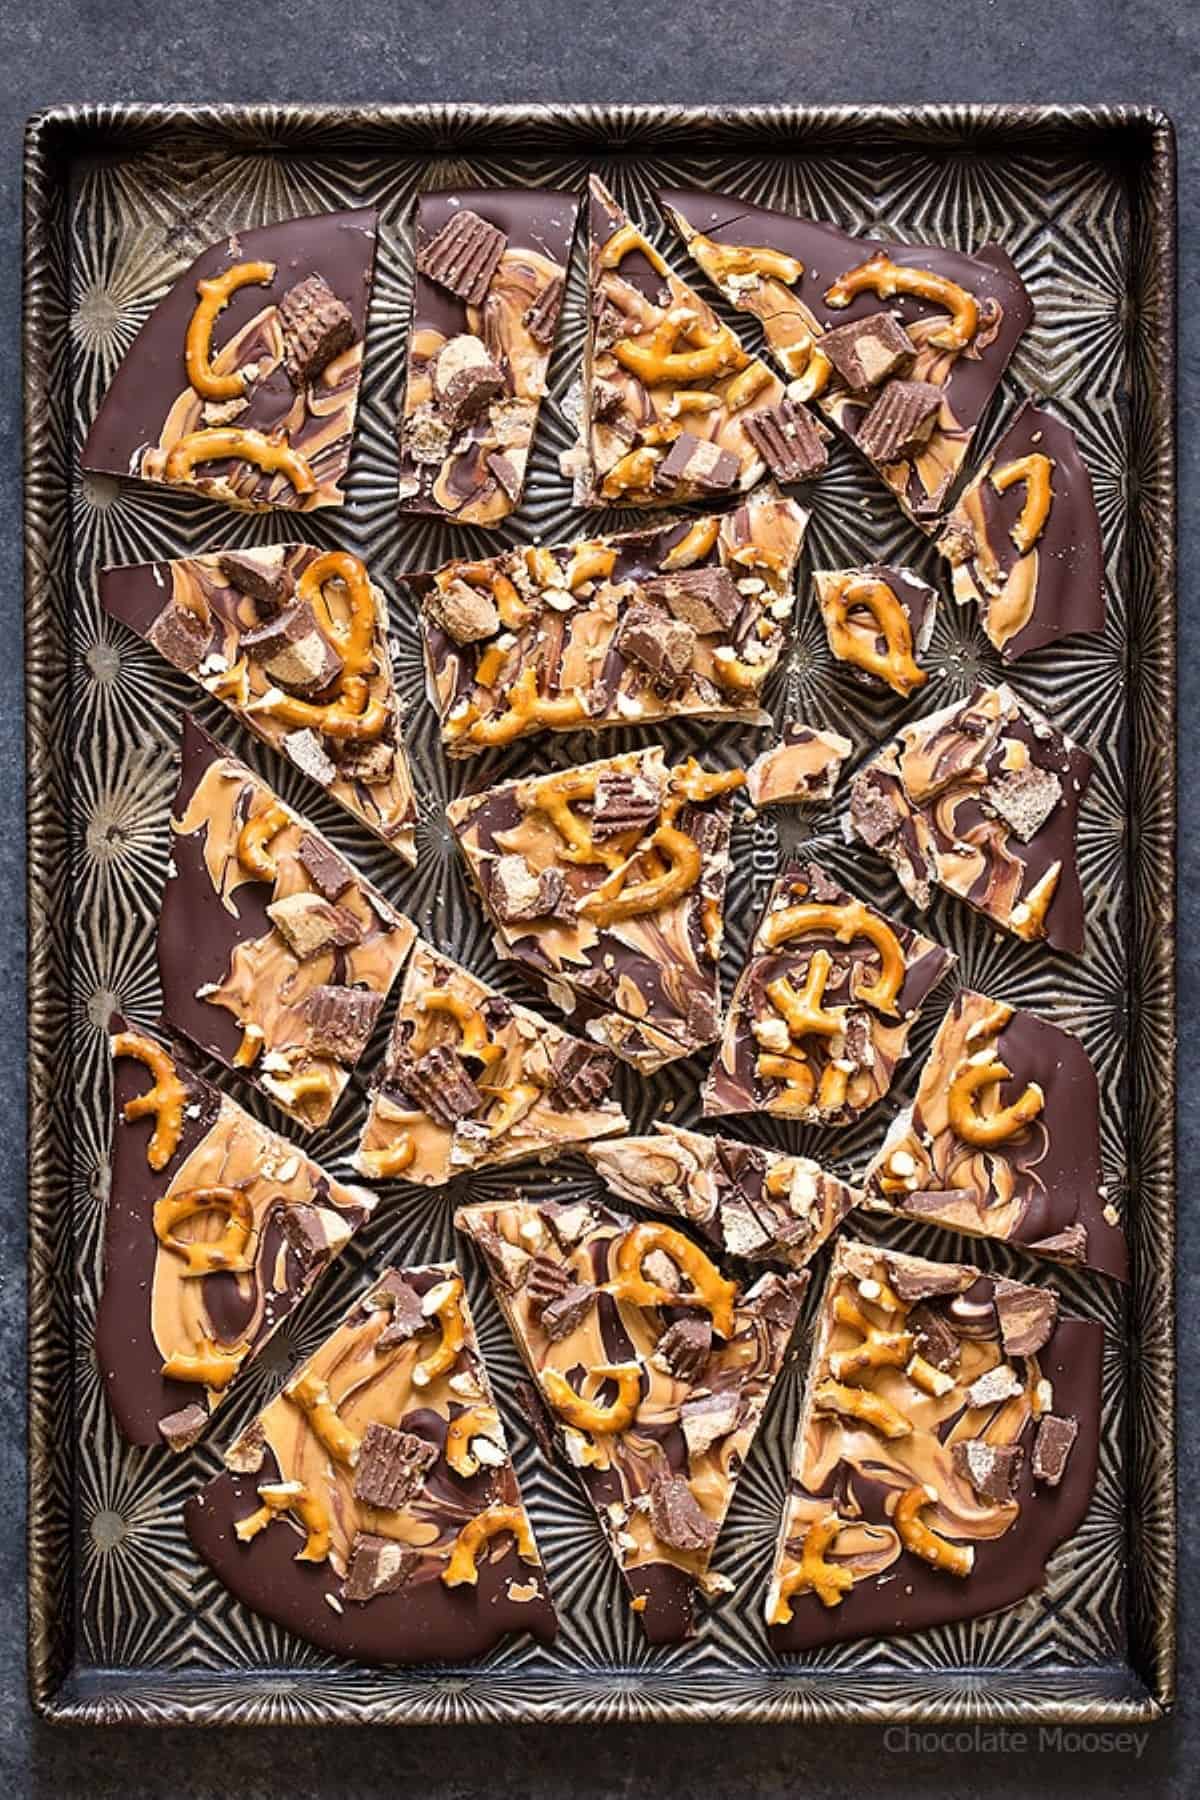 Chocolate Peanut Butter Pretzel Bark broken into pieces on a large metal tray with a black and silver design.